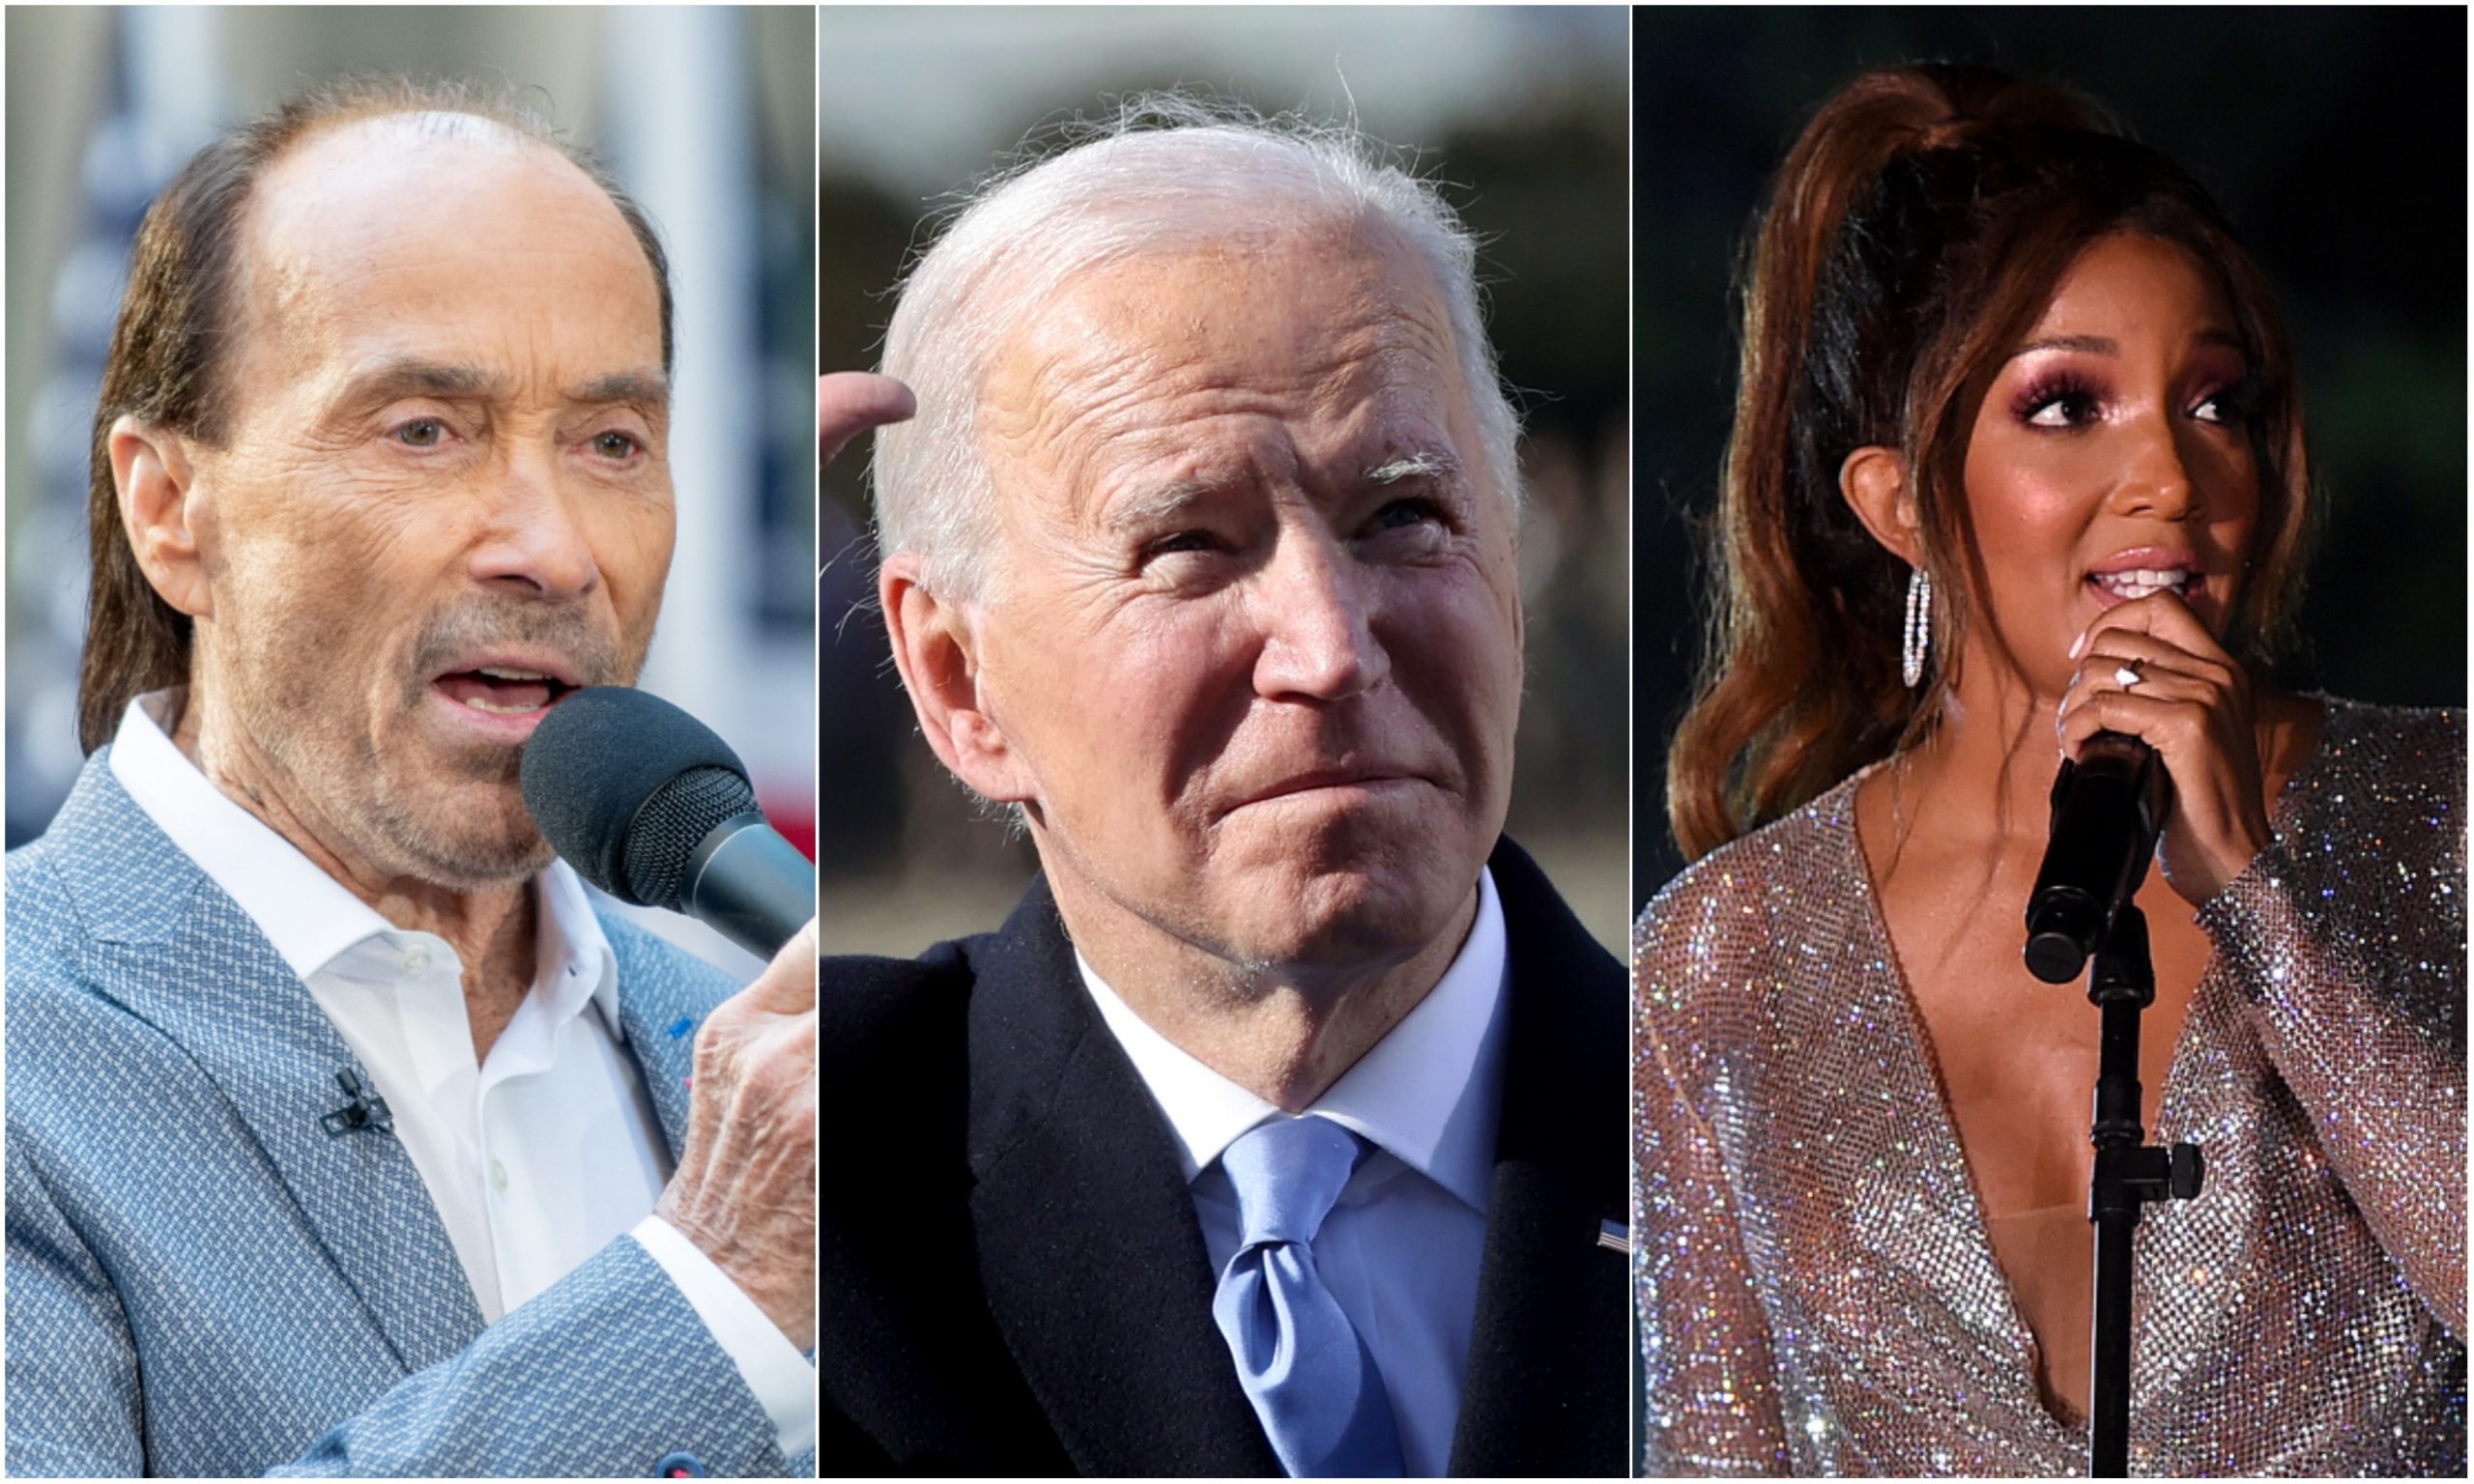 Lee Greenwood, Mickey Guyton and Others React to Inauguration Day Sounds  Like Nashville